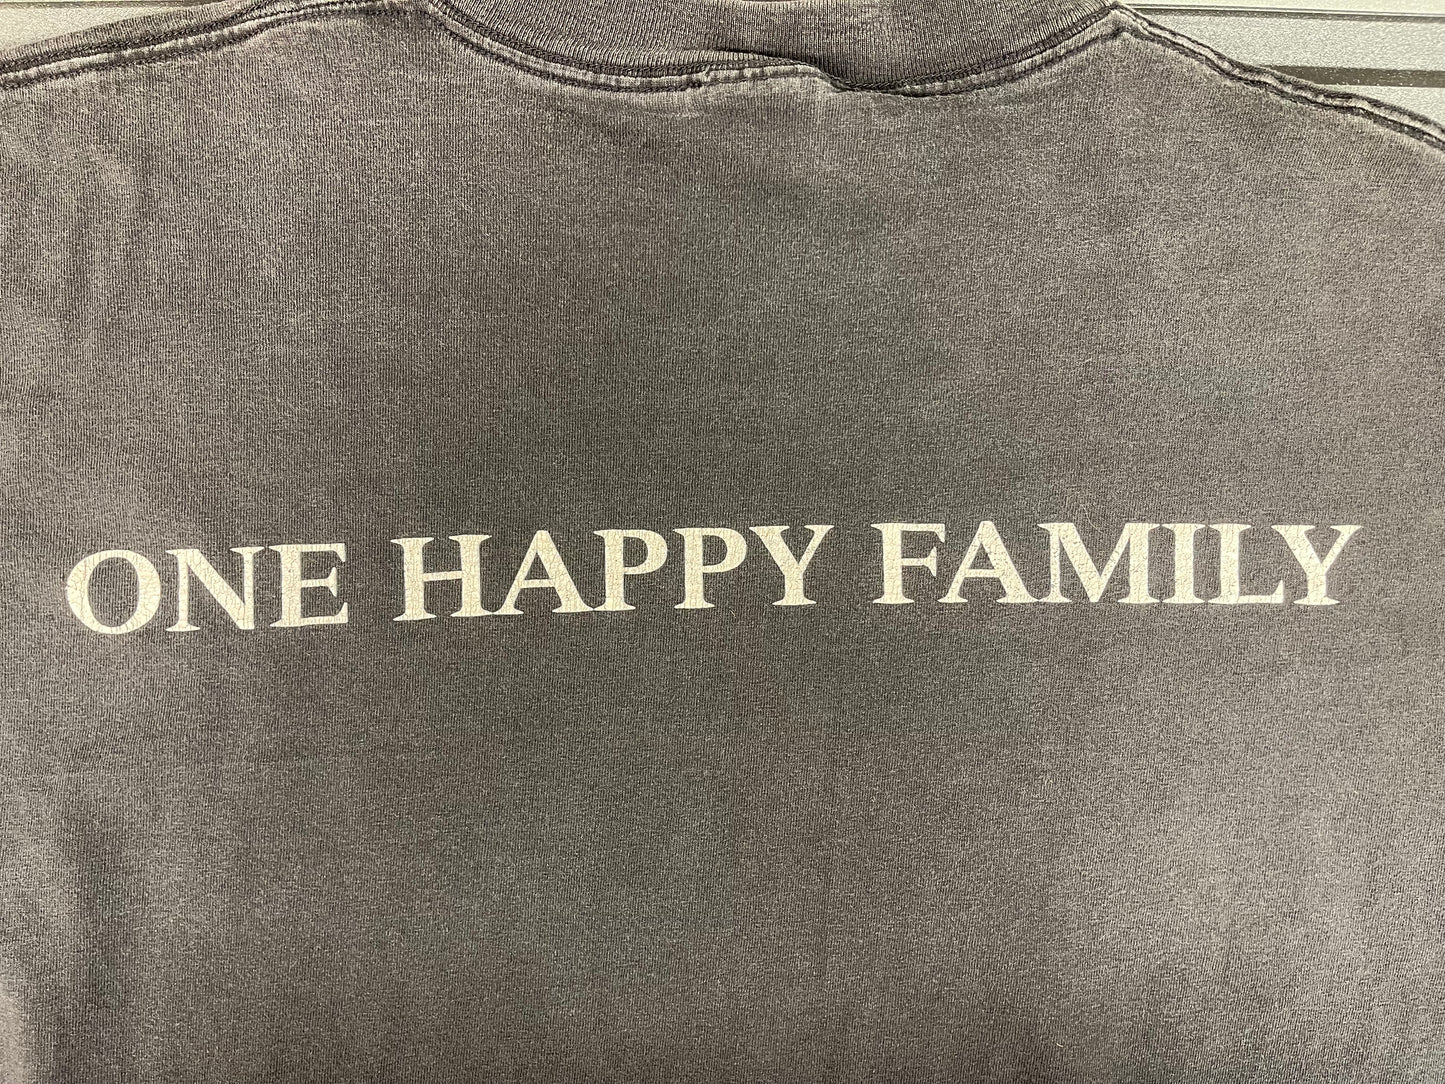 1994 Interview With A Vampire “One Happy Family” Variant Official Movie Shirt